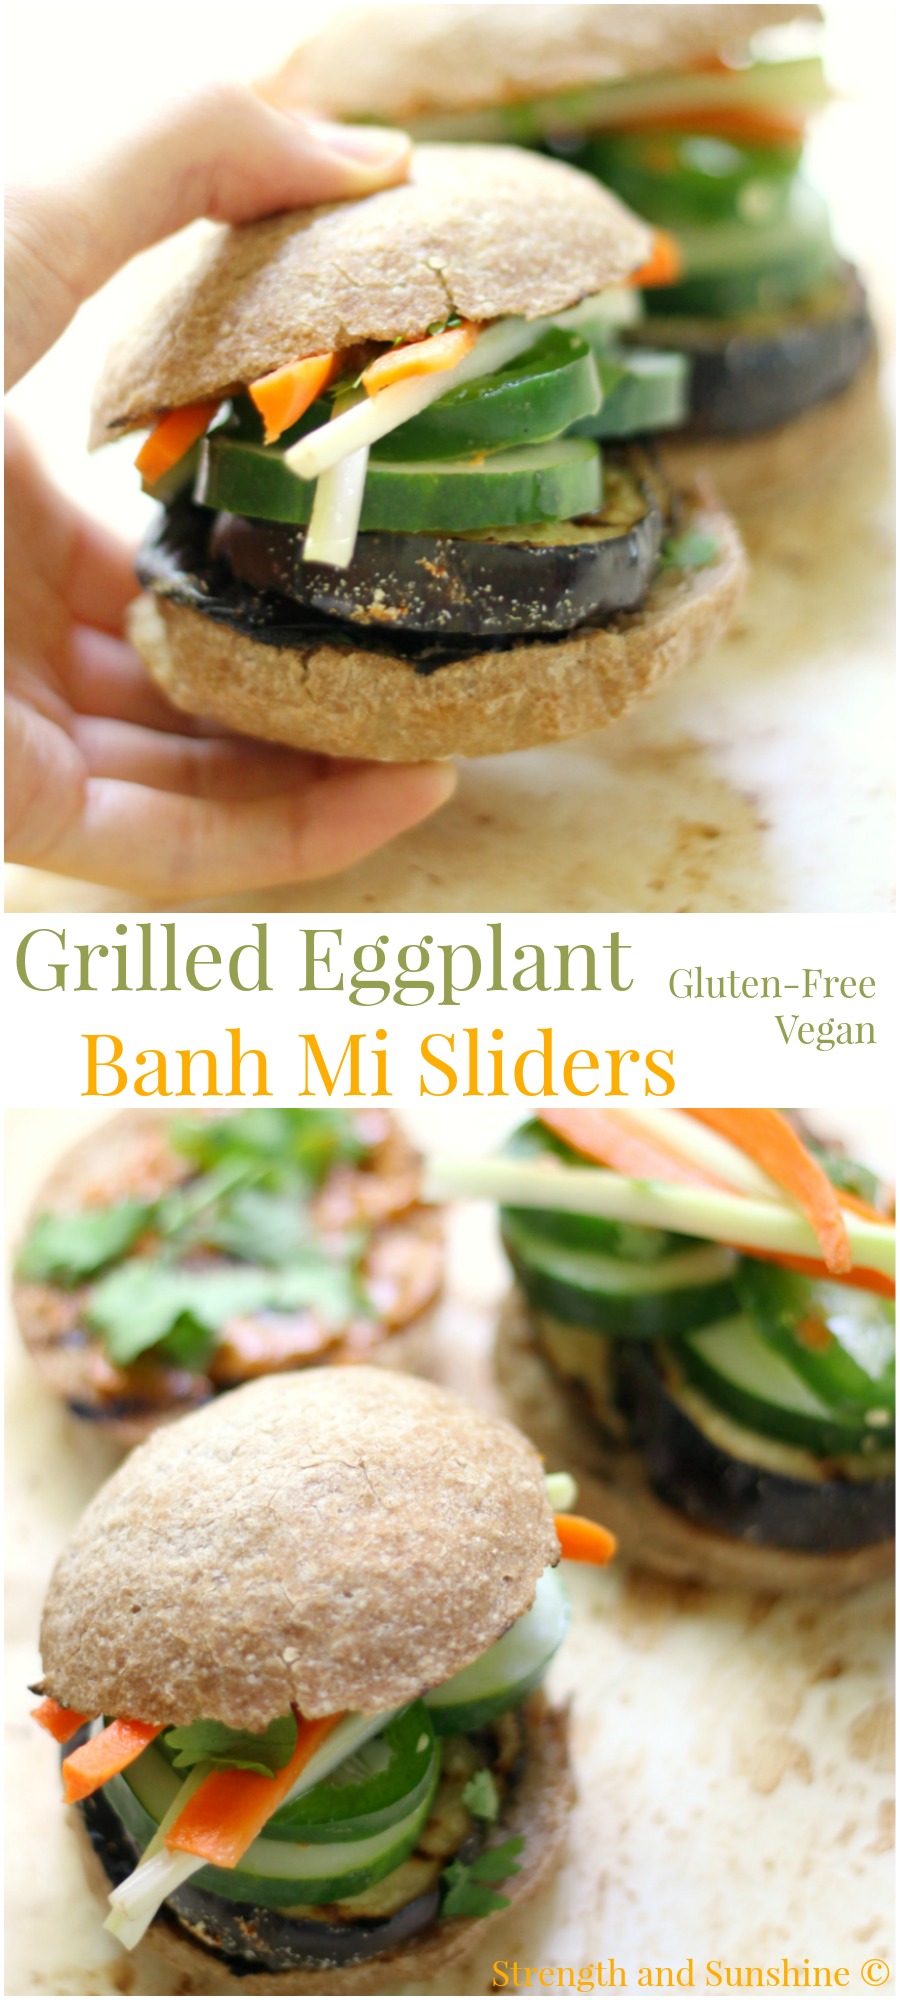 Grilled Eggplant Banh Mi Sliders | Strength and Sunshine @RebeccaGF666 The classic Vietnamese sandwich made healthy, gluten-free, & vegan. Grilled Eggplant Banh Mi Sliders are a hearty, spicy, & veggie-packed recipe you can serve up for lunch, dinner, or a party!